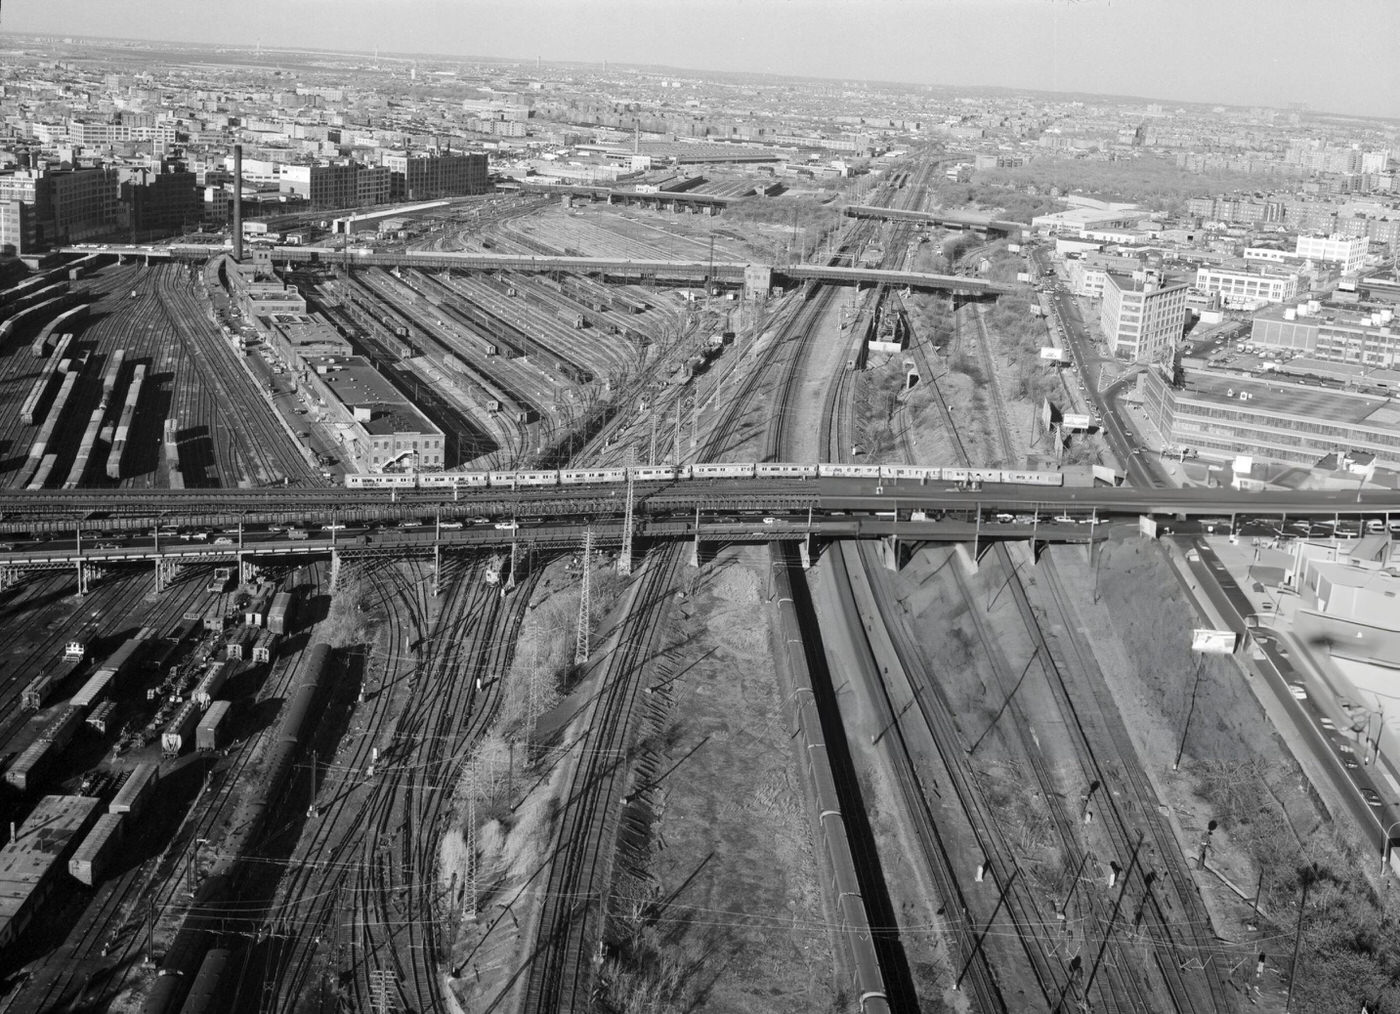 A Train Travels Along The Honeywell Street Bridge That Crosses The Sunnyside Yards In Long Island City, Queens, 1977.